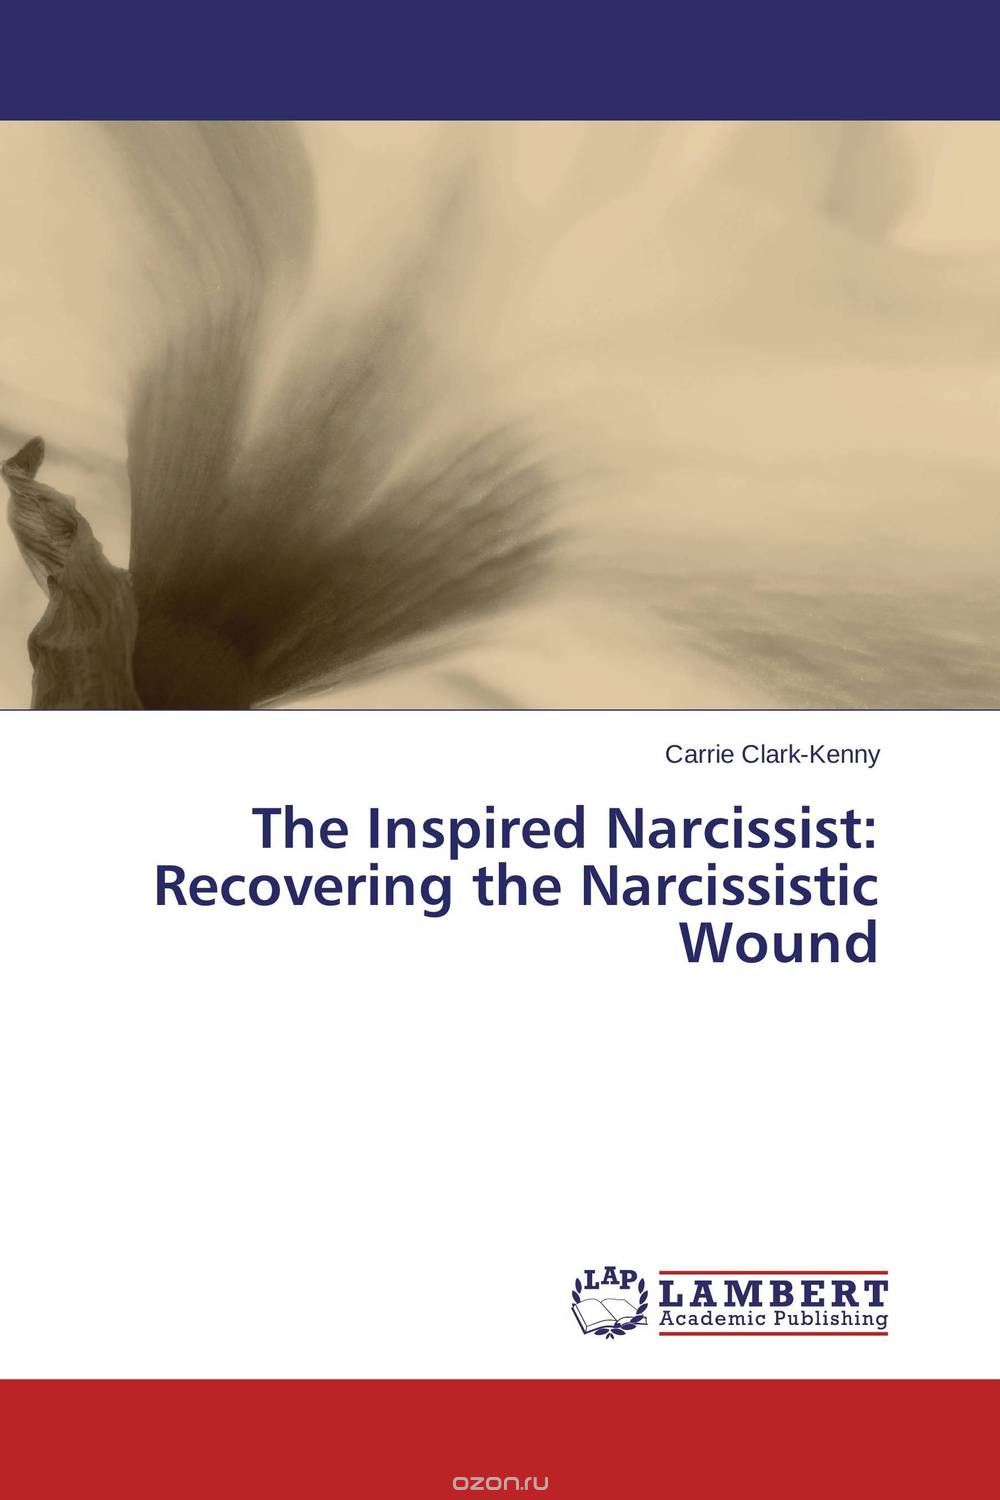 The Inspired Narcissist: Recovering the Narcissistic Wound